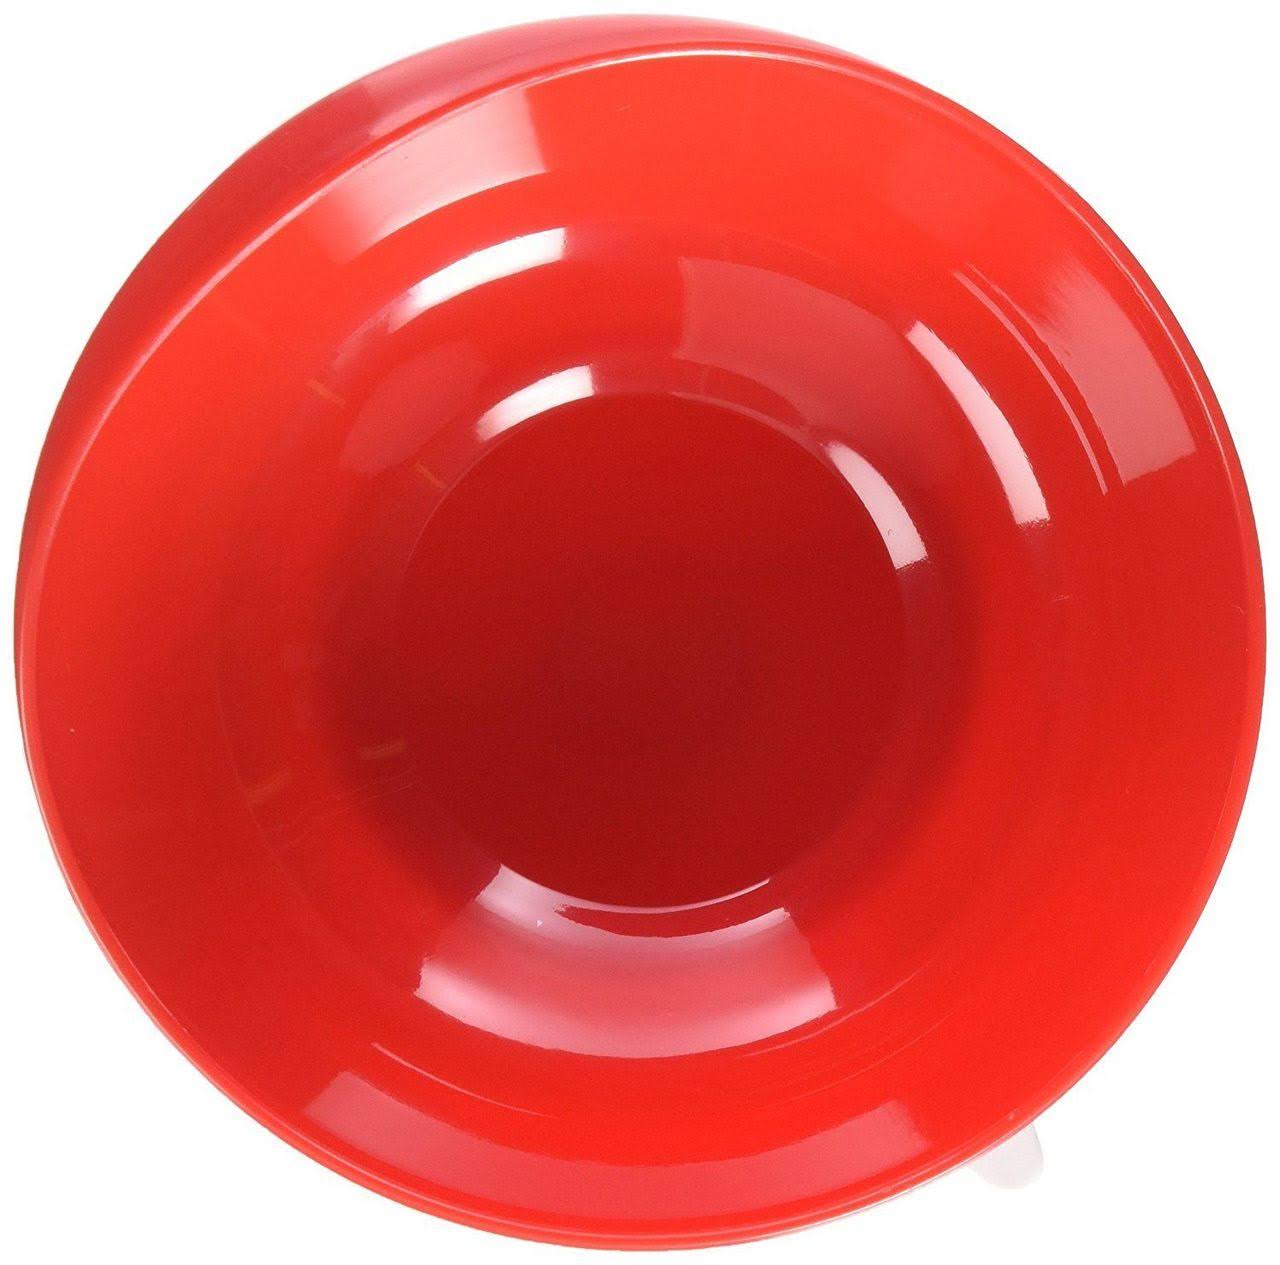 Essential Medical Supply Power of Red Scoop Bowl